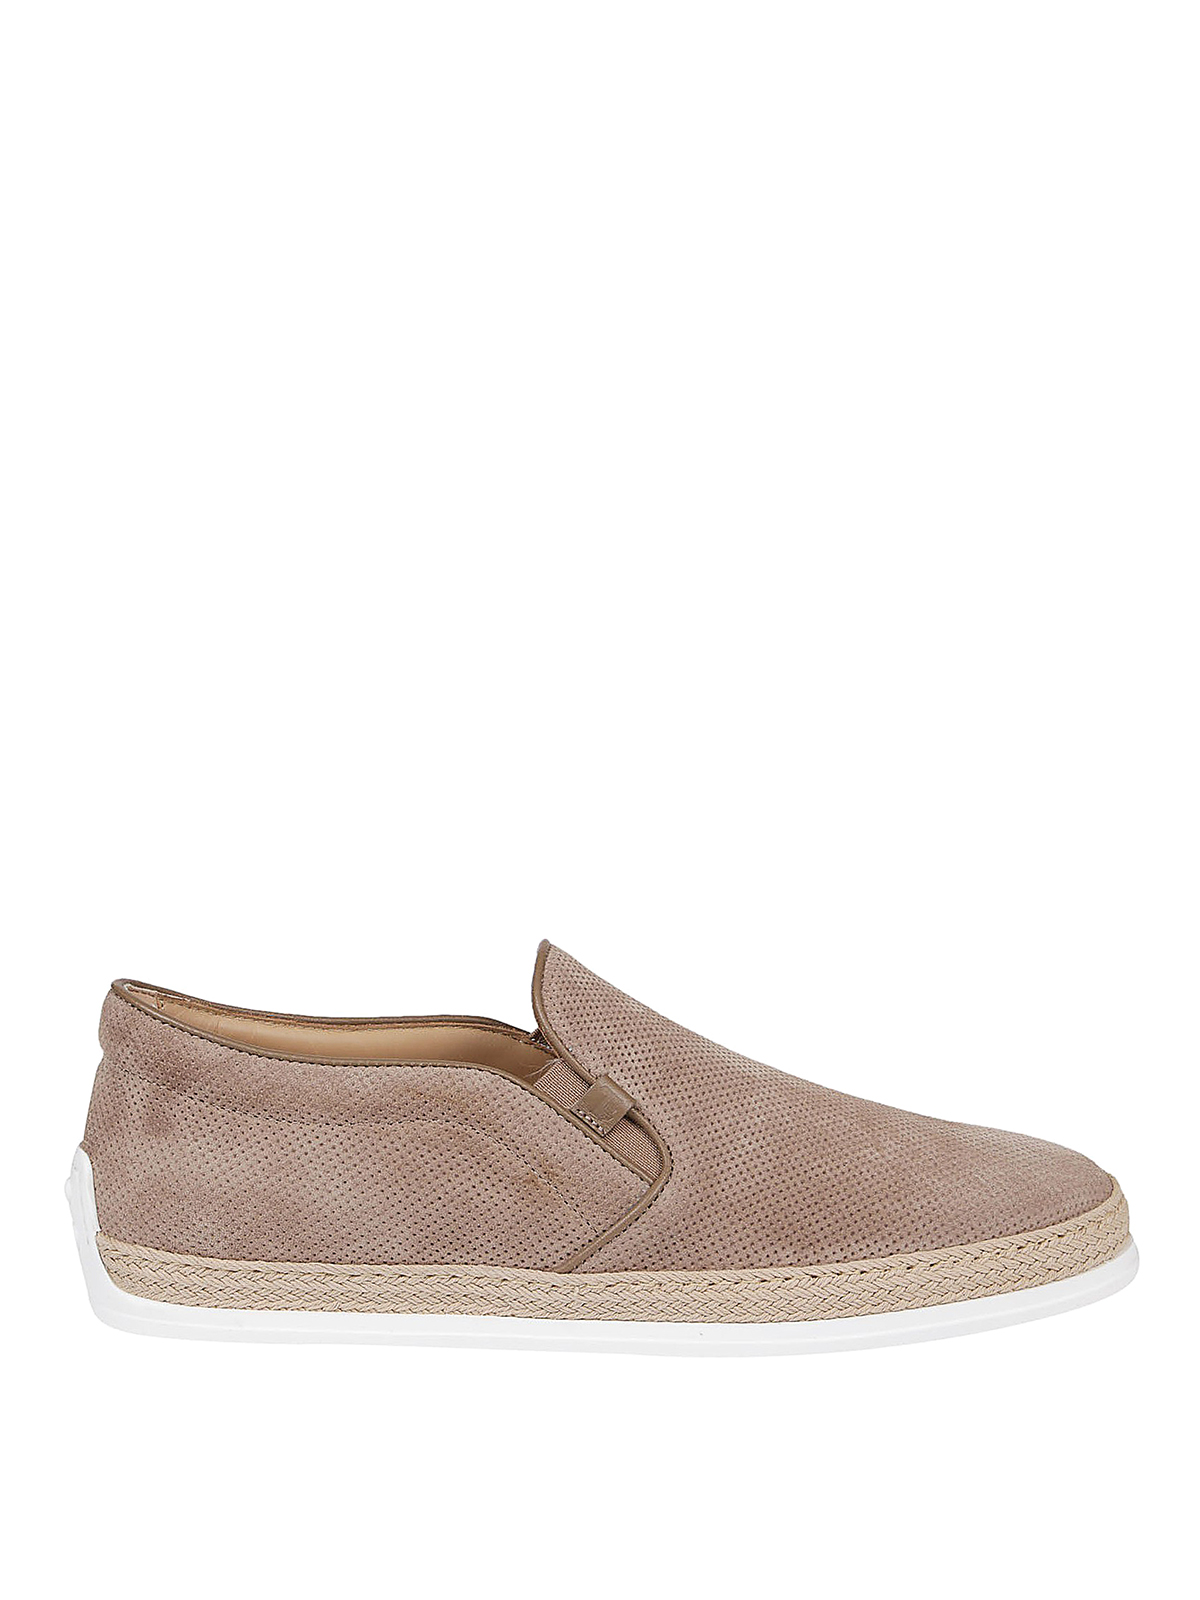 TOD'S PERFORATED SUEDE SLIP-ONS